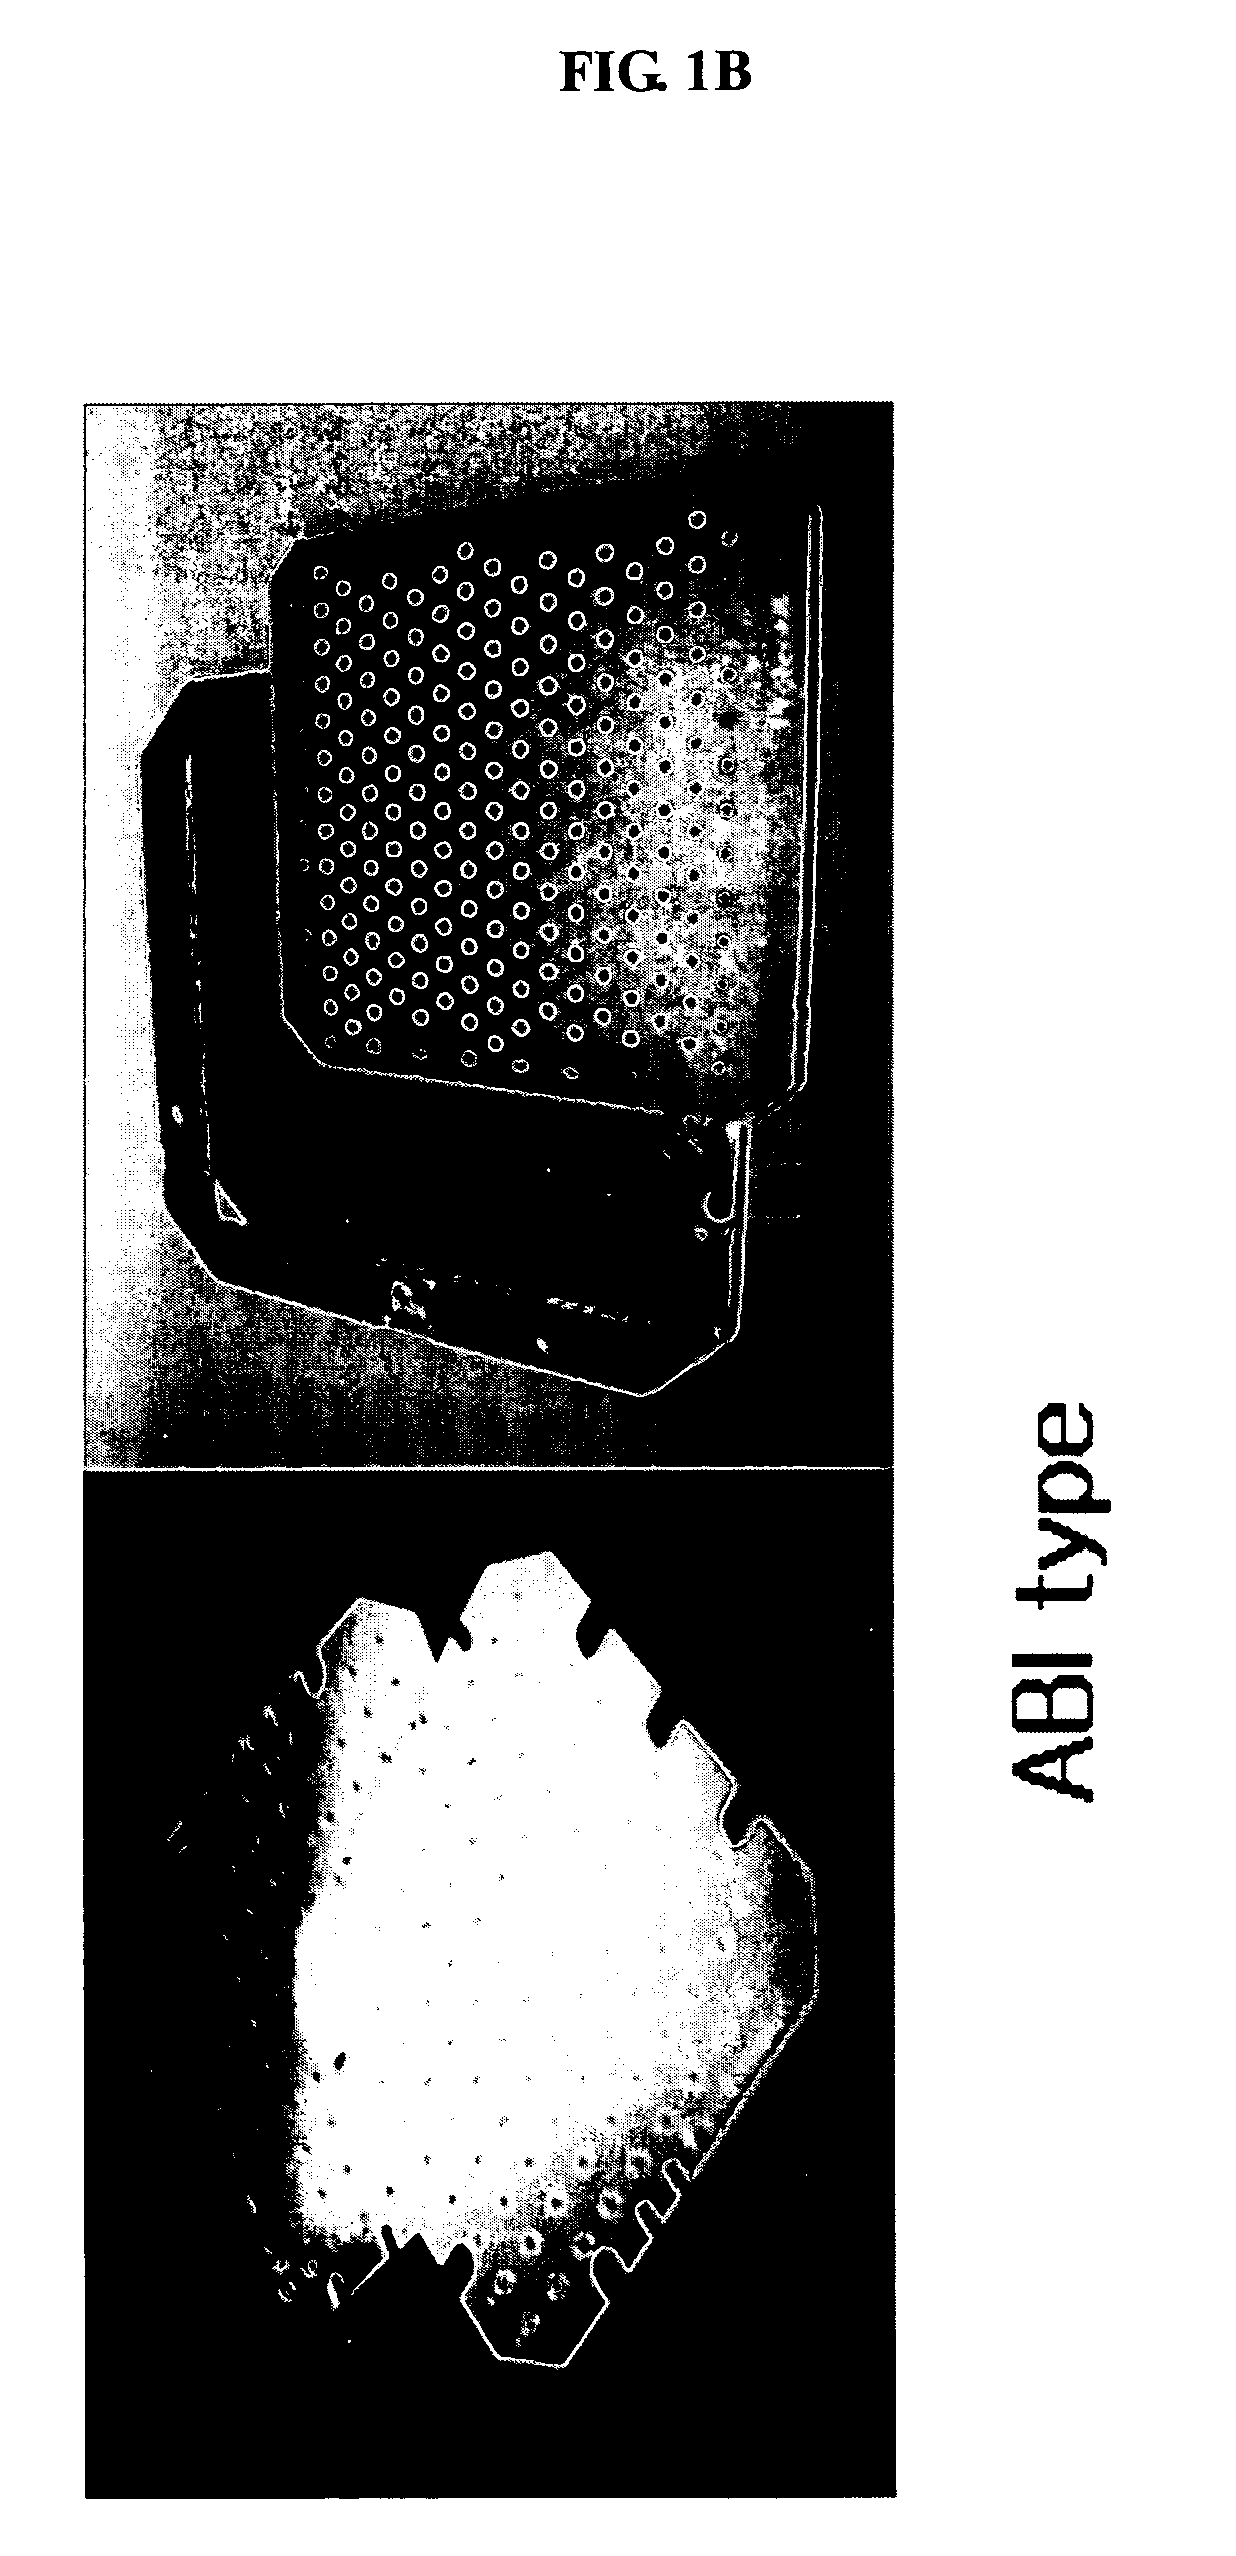 Sample plate for MALDI mass spectrometry and process for manufacture of the same